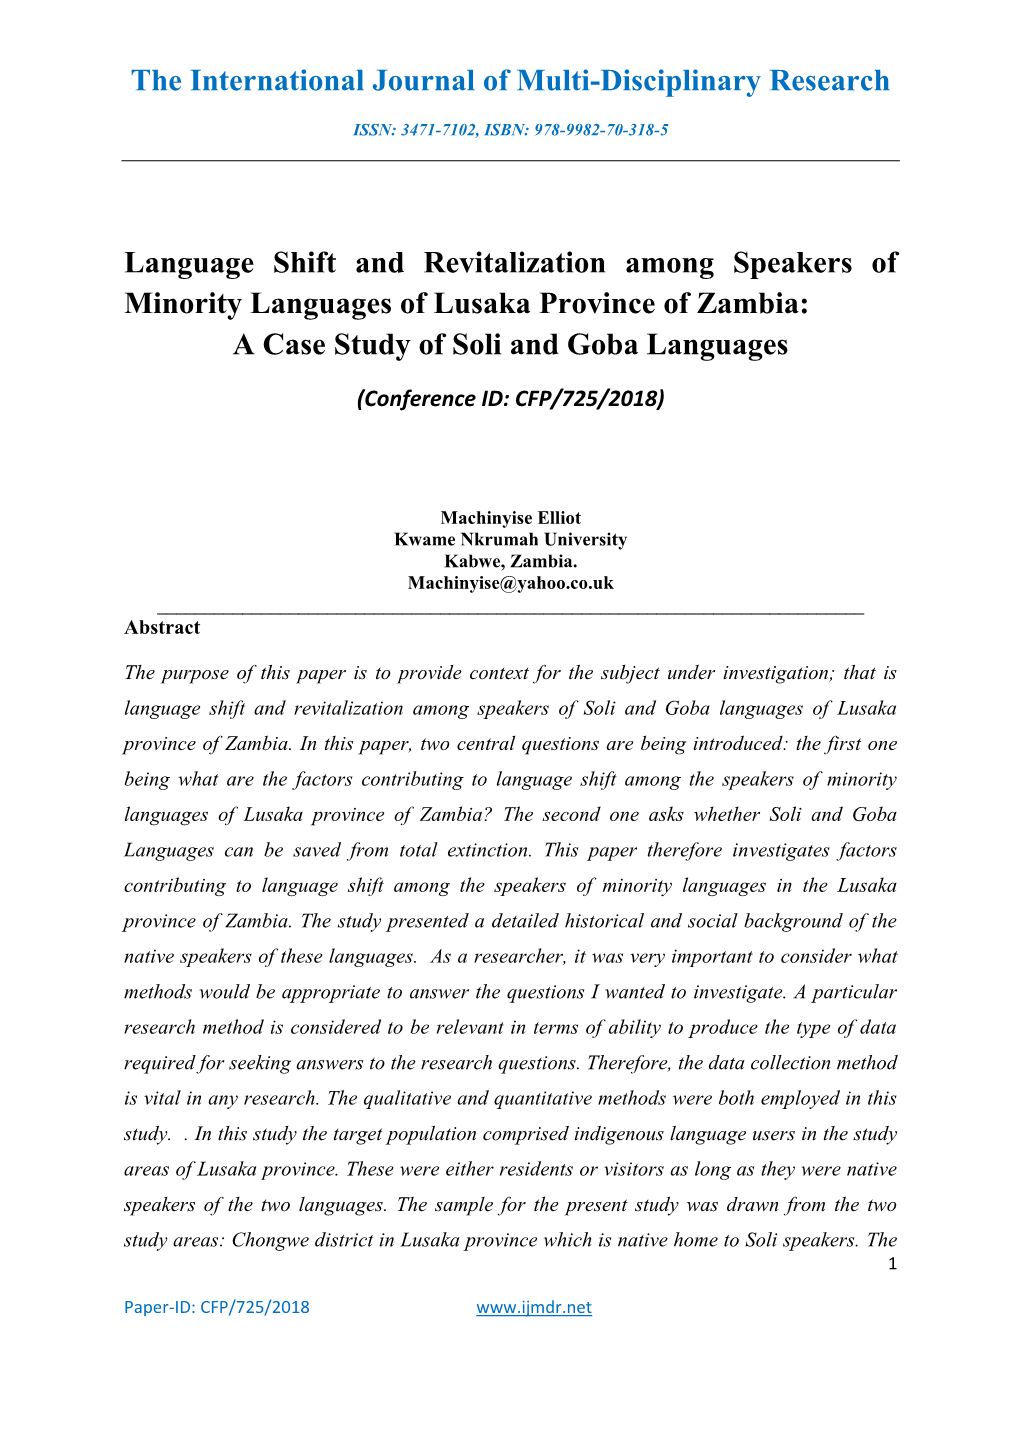 Language Shift and Revitalization Among Speakers of Minority Languages of Lusaka Province of Zambia: a Case Study of Soli and Goba Languages